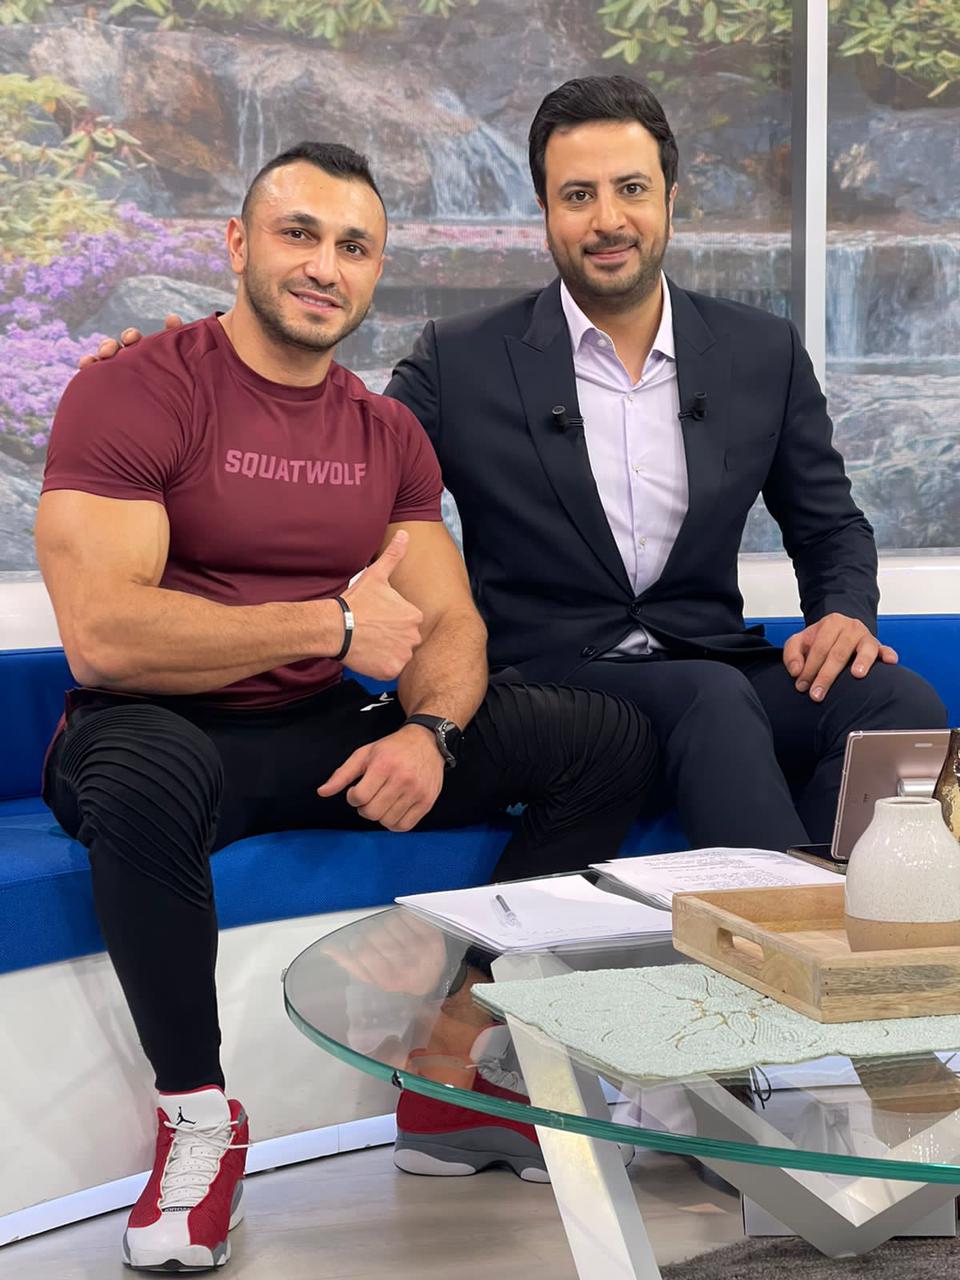 Learn how to exercise at home using household items with the personal trainer Ahmed Mokbel "MBC1"